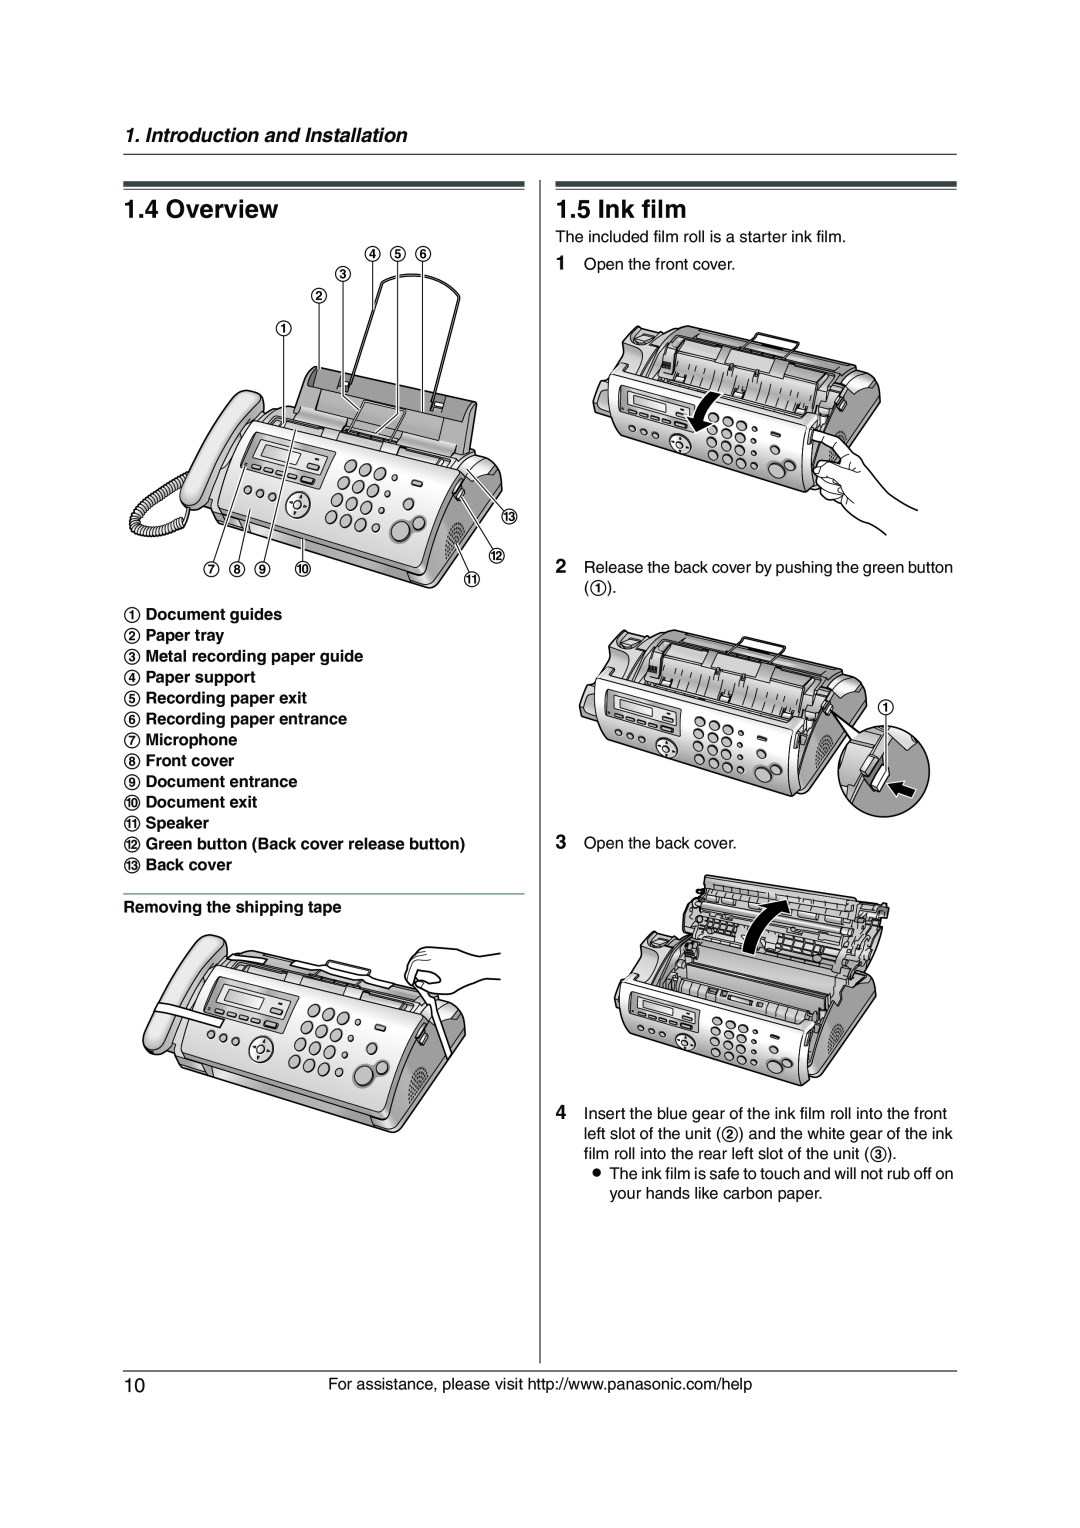 Panasonic KX-FP215 operating instructions Overview, Ink film, Introduction and Installation 